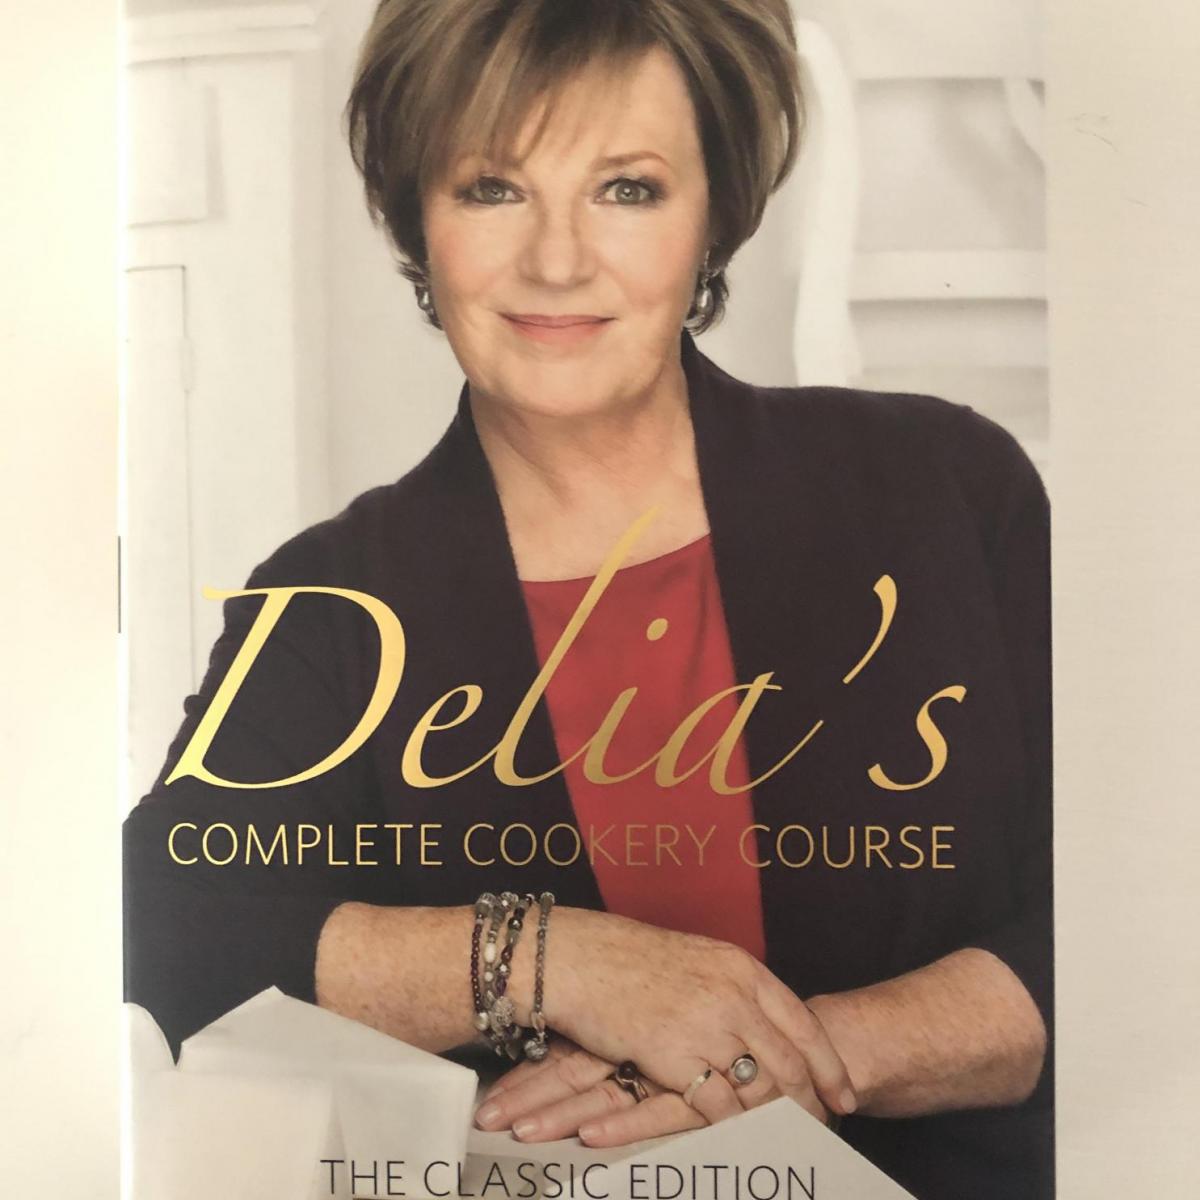 A picture of Delia's Complete Cookery Course